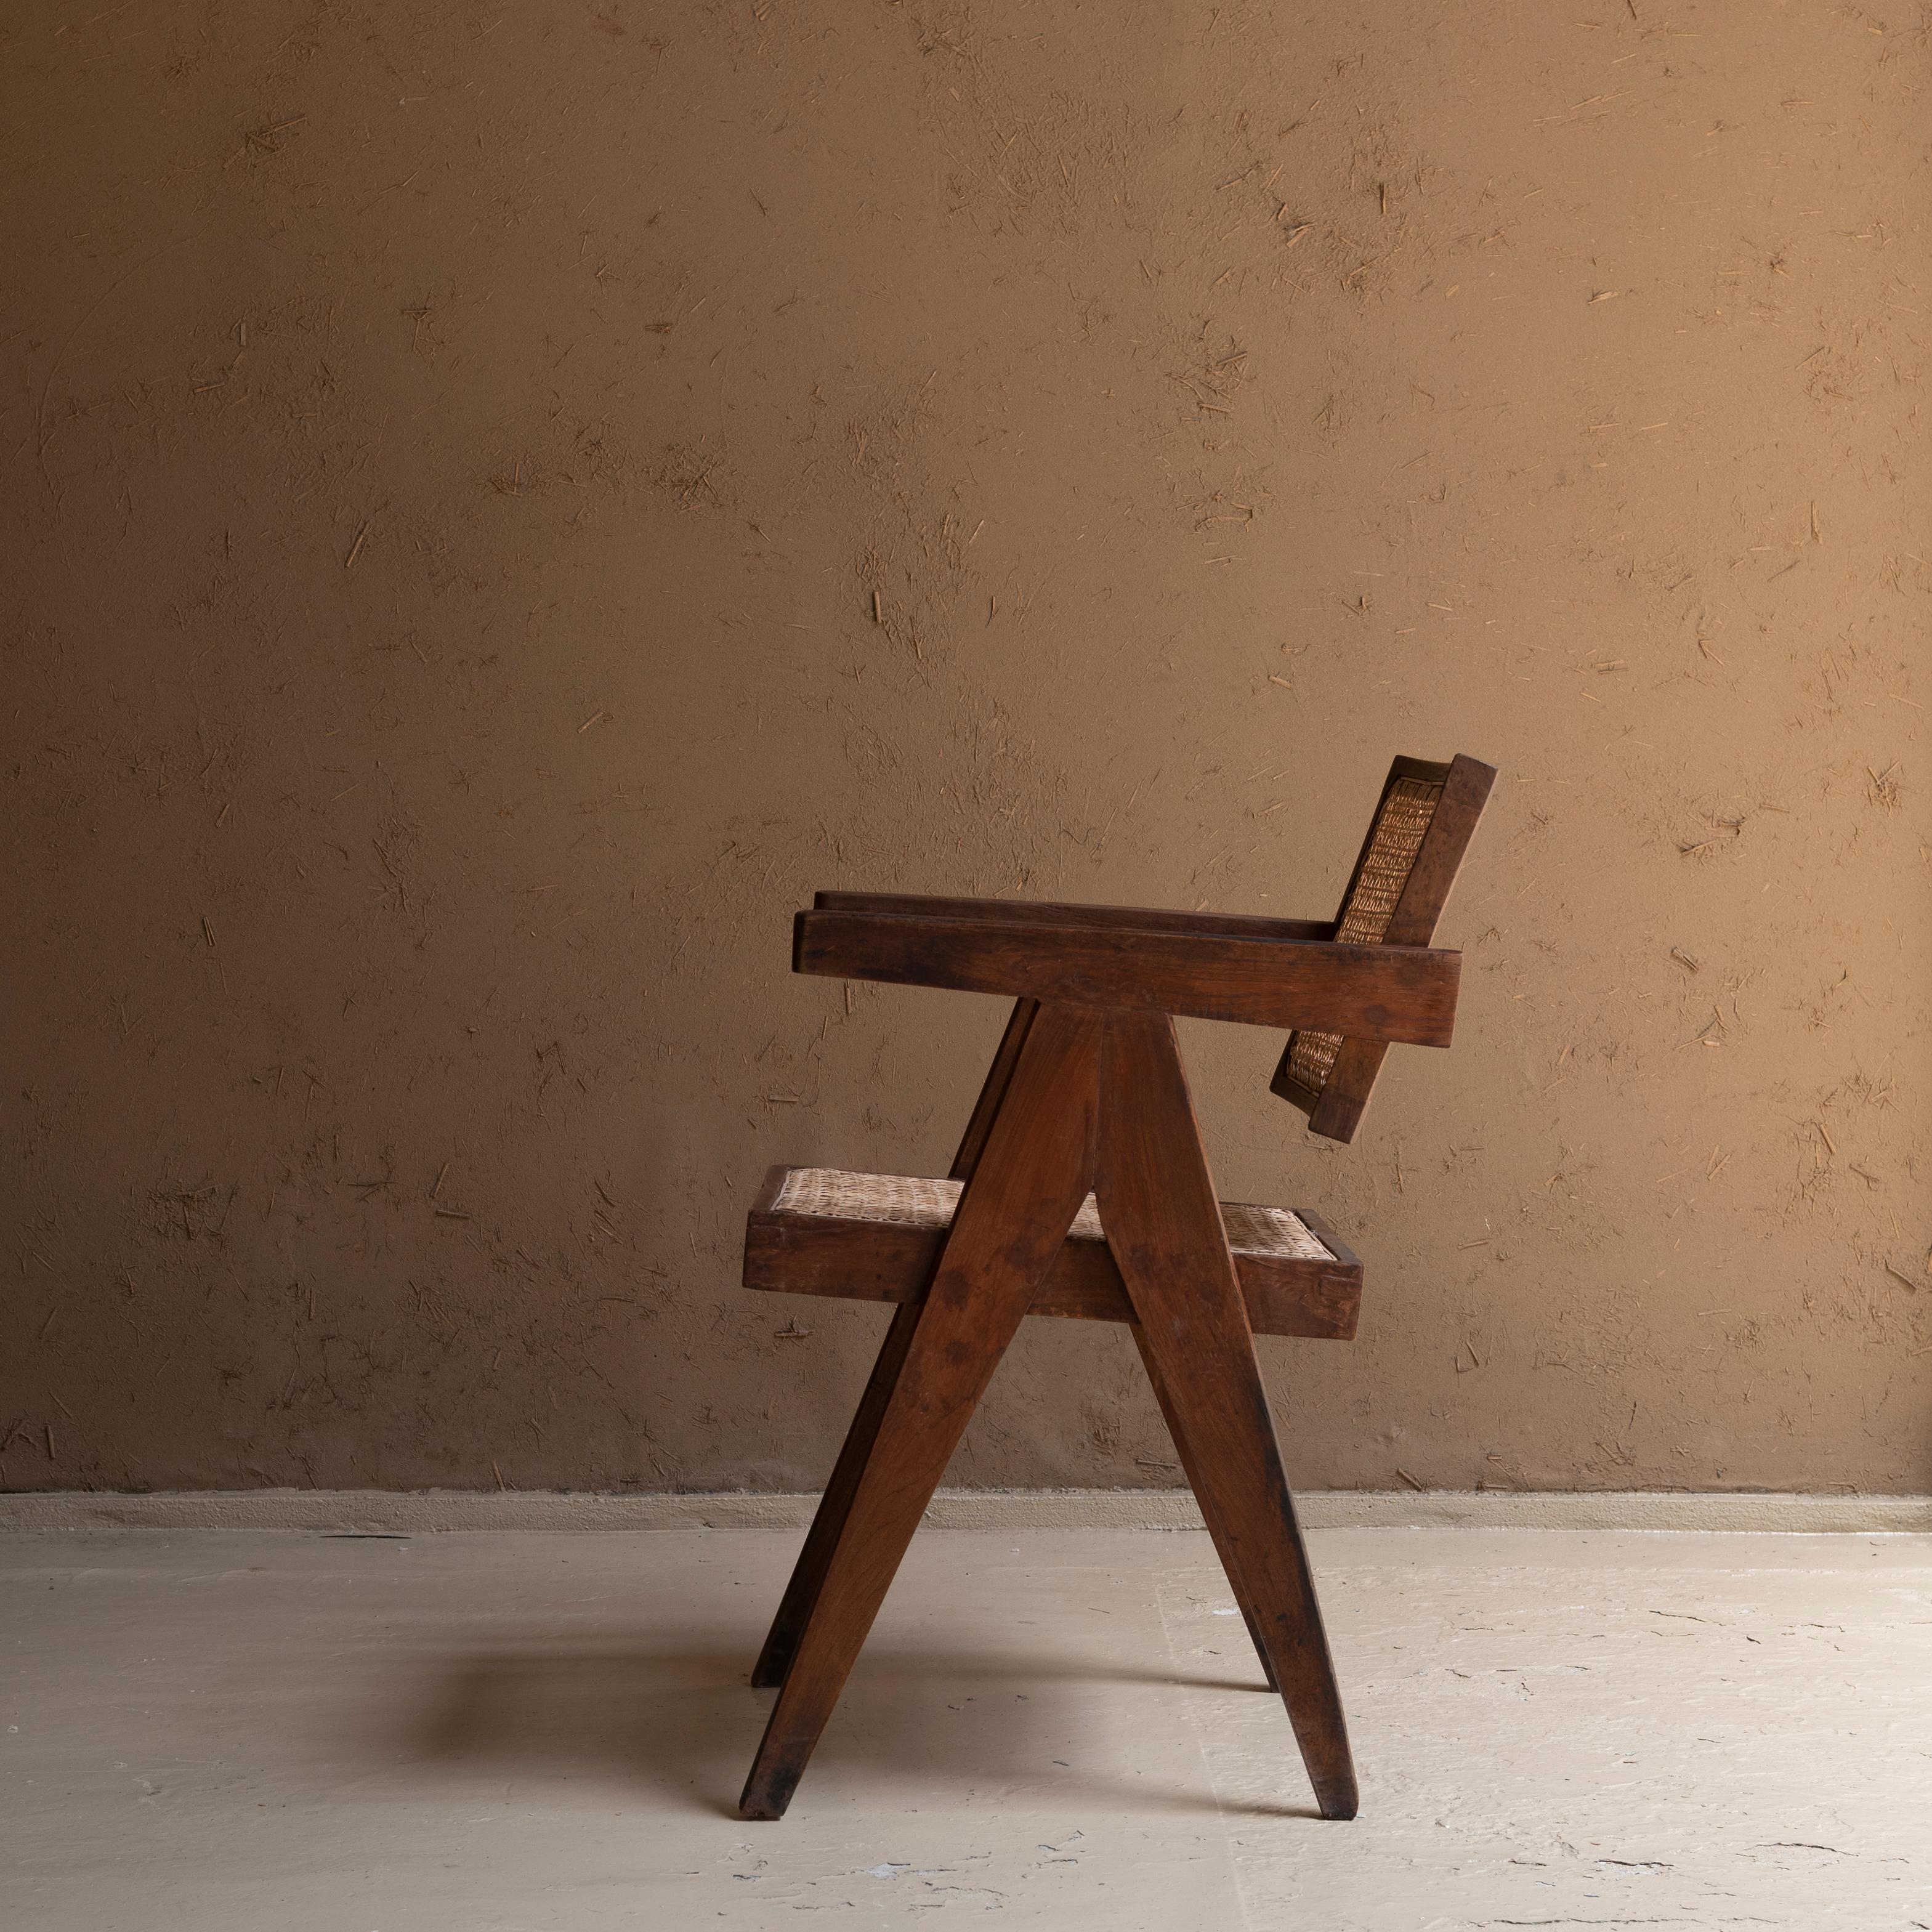 Indian Pierre Jeanneret Office Chair, Circa 1955-56, Punjab Agricultural University For Sale